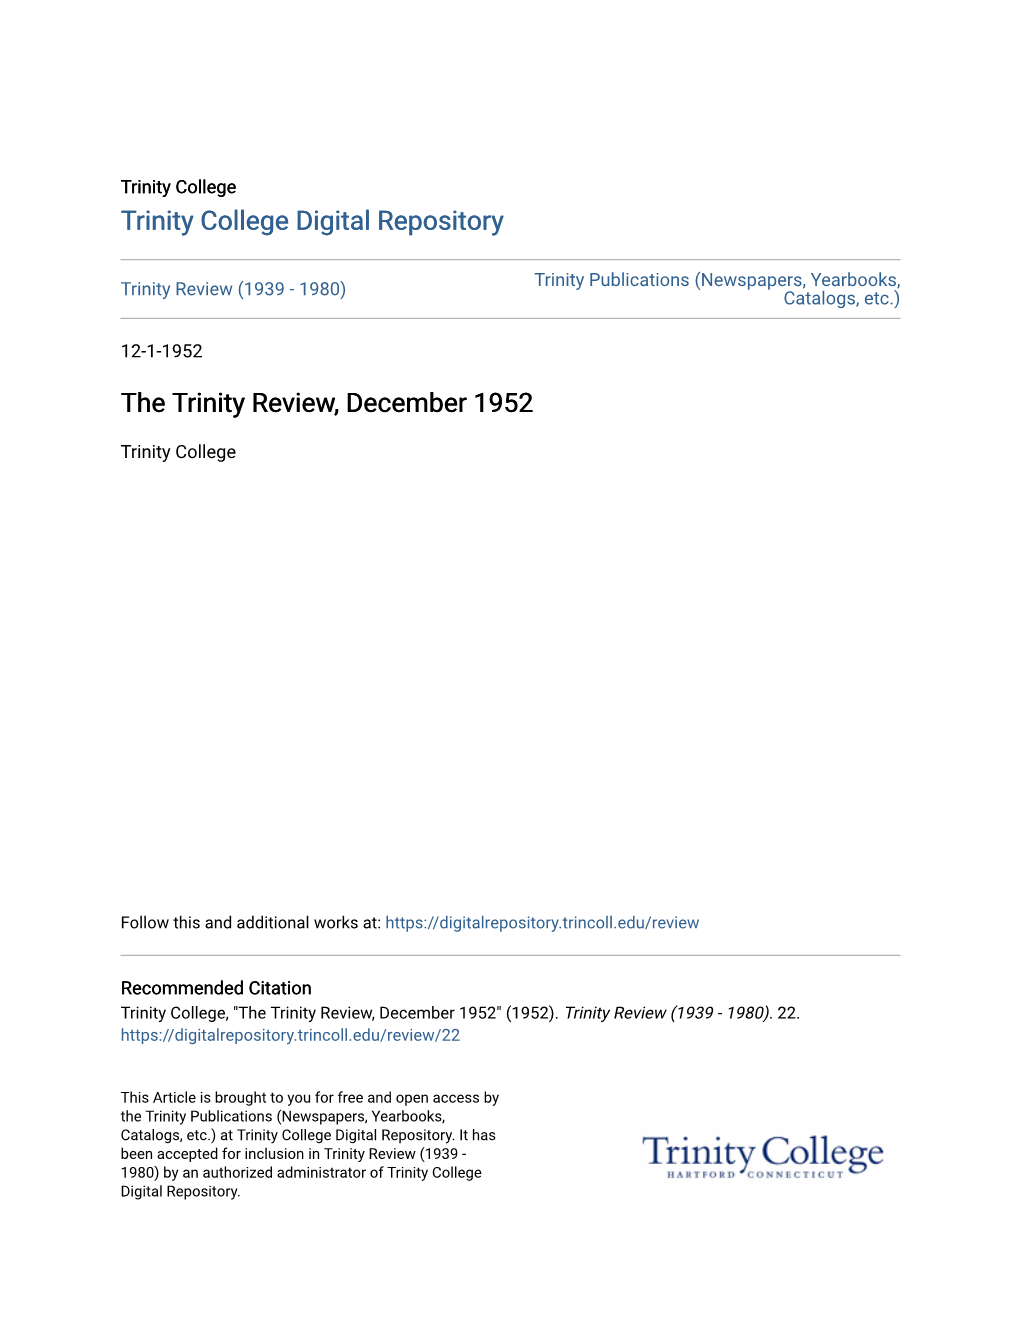 The Trinity Review, December 1952